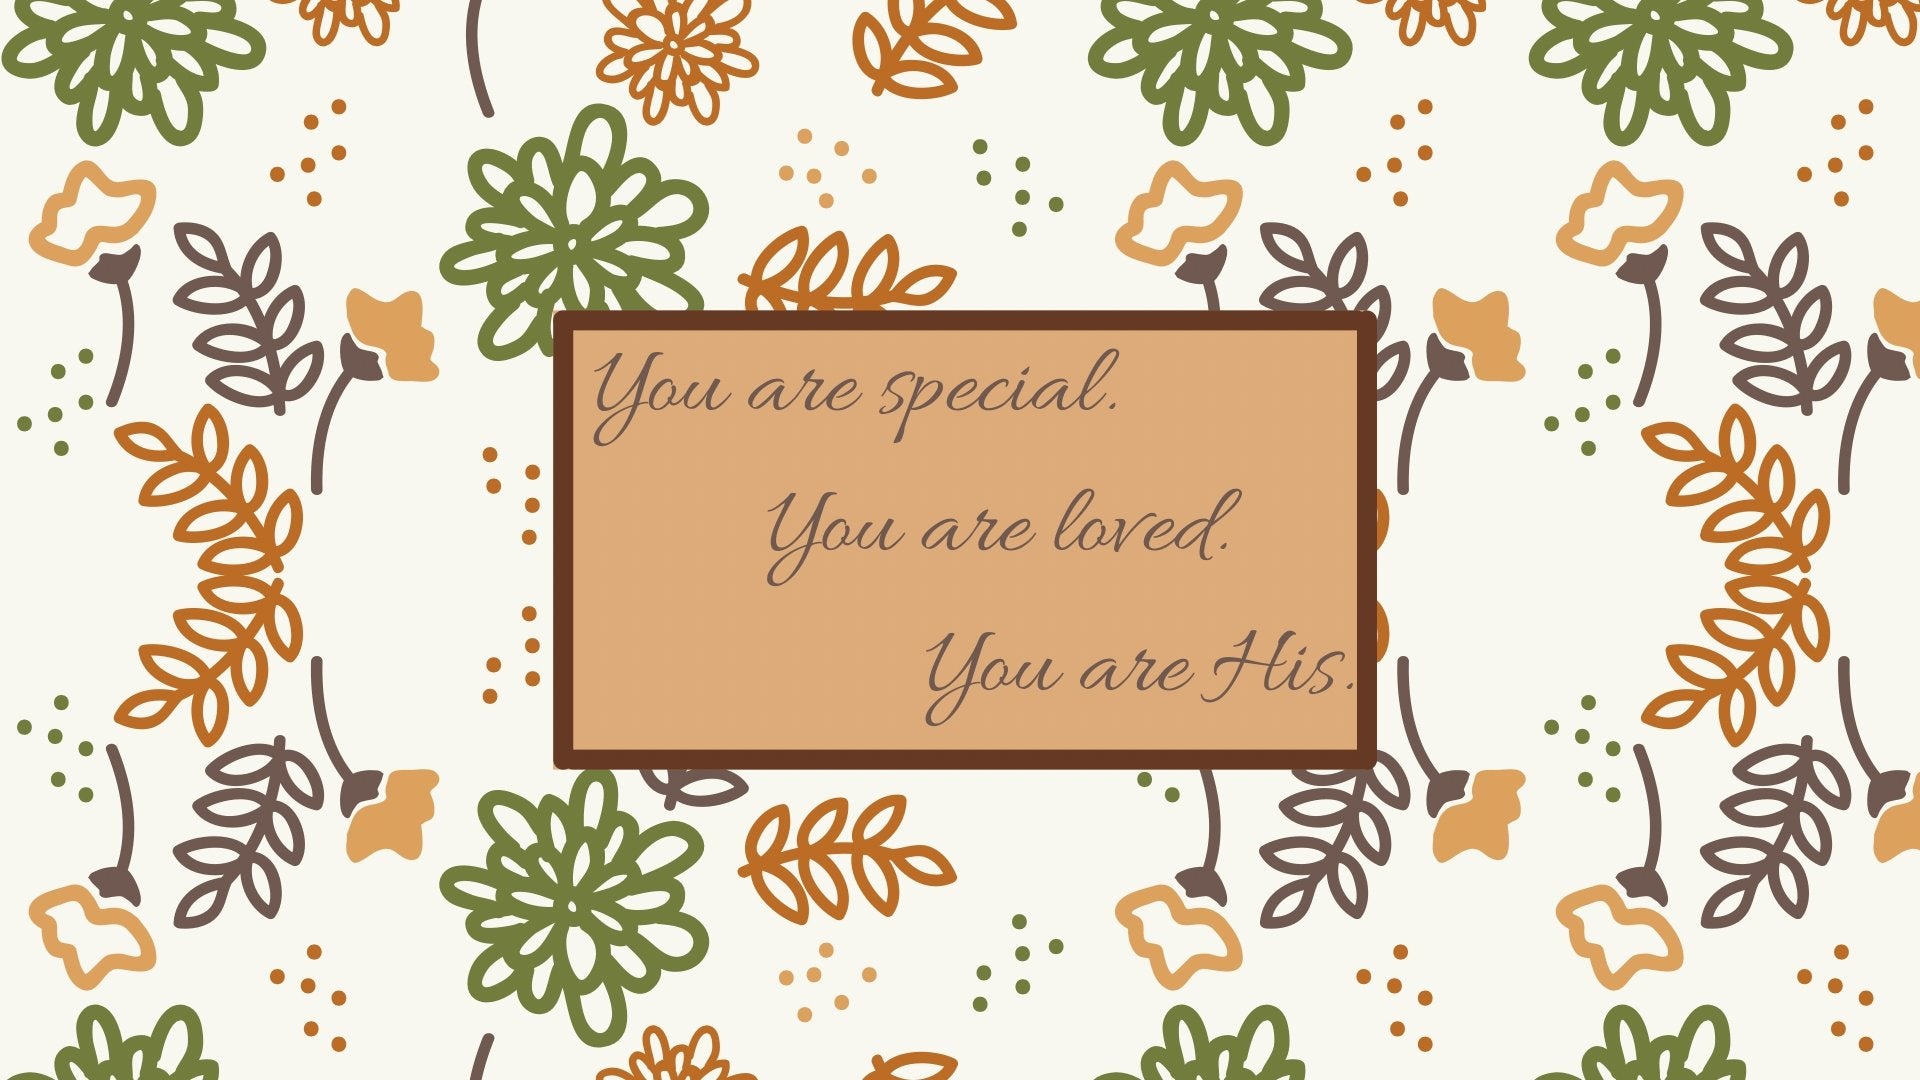 You are special. You are loved. You are His. Desktop wallpapers - Bee The Light